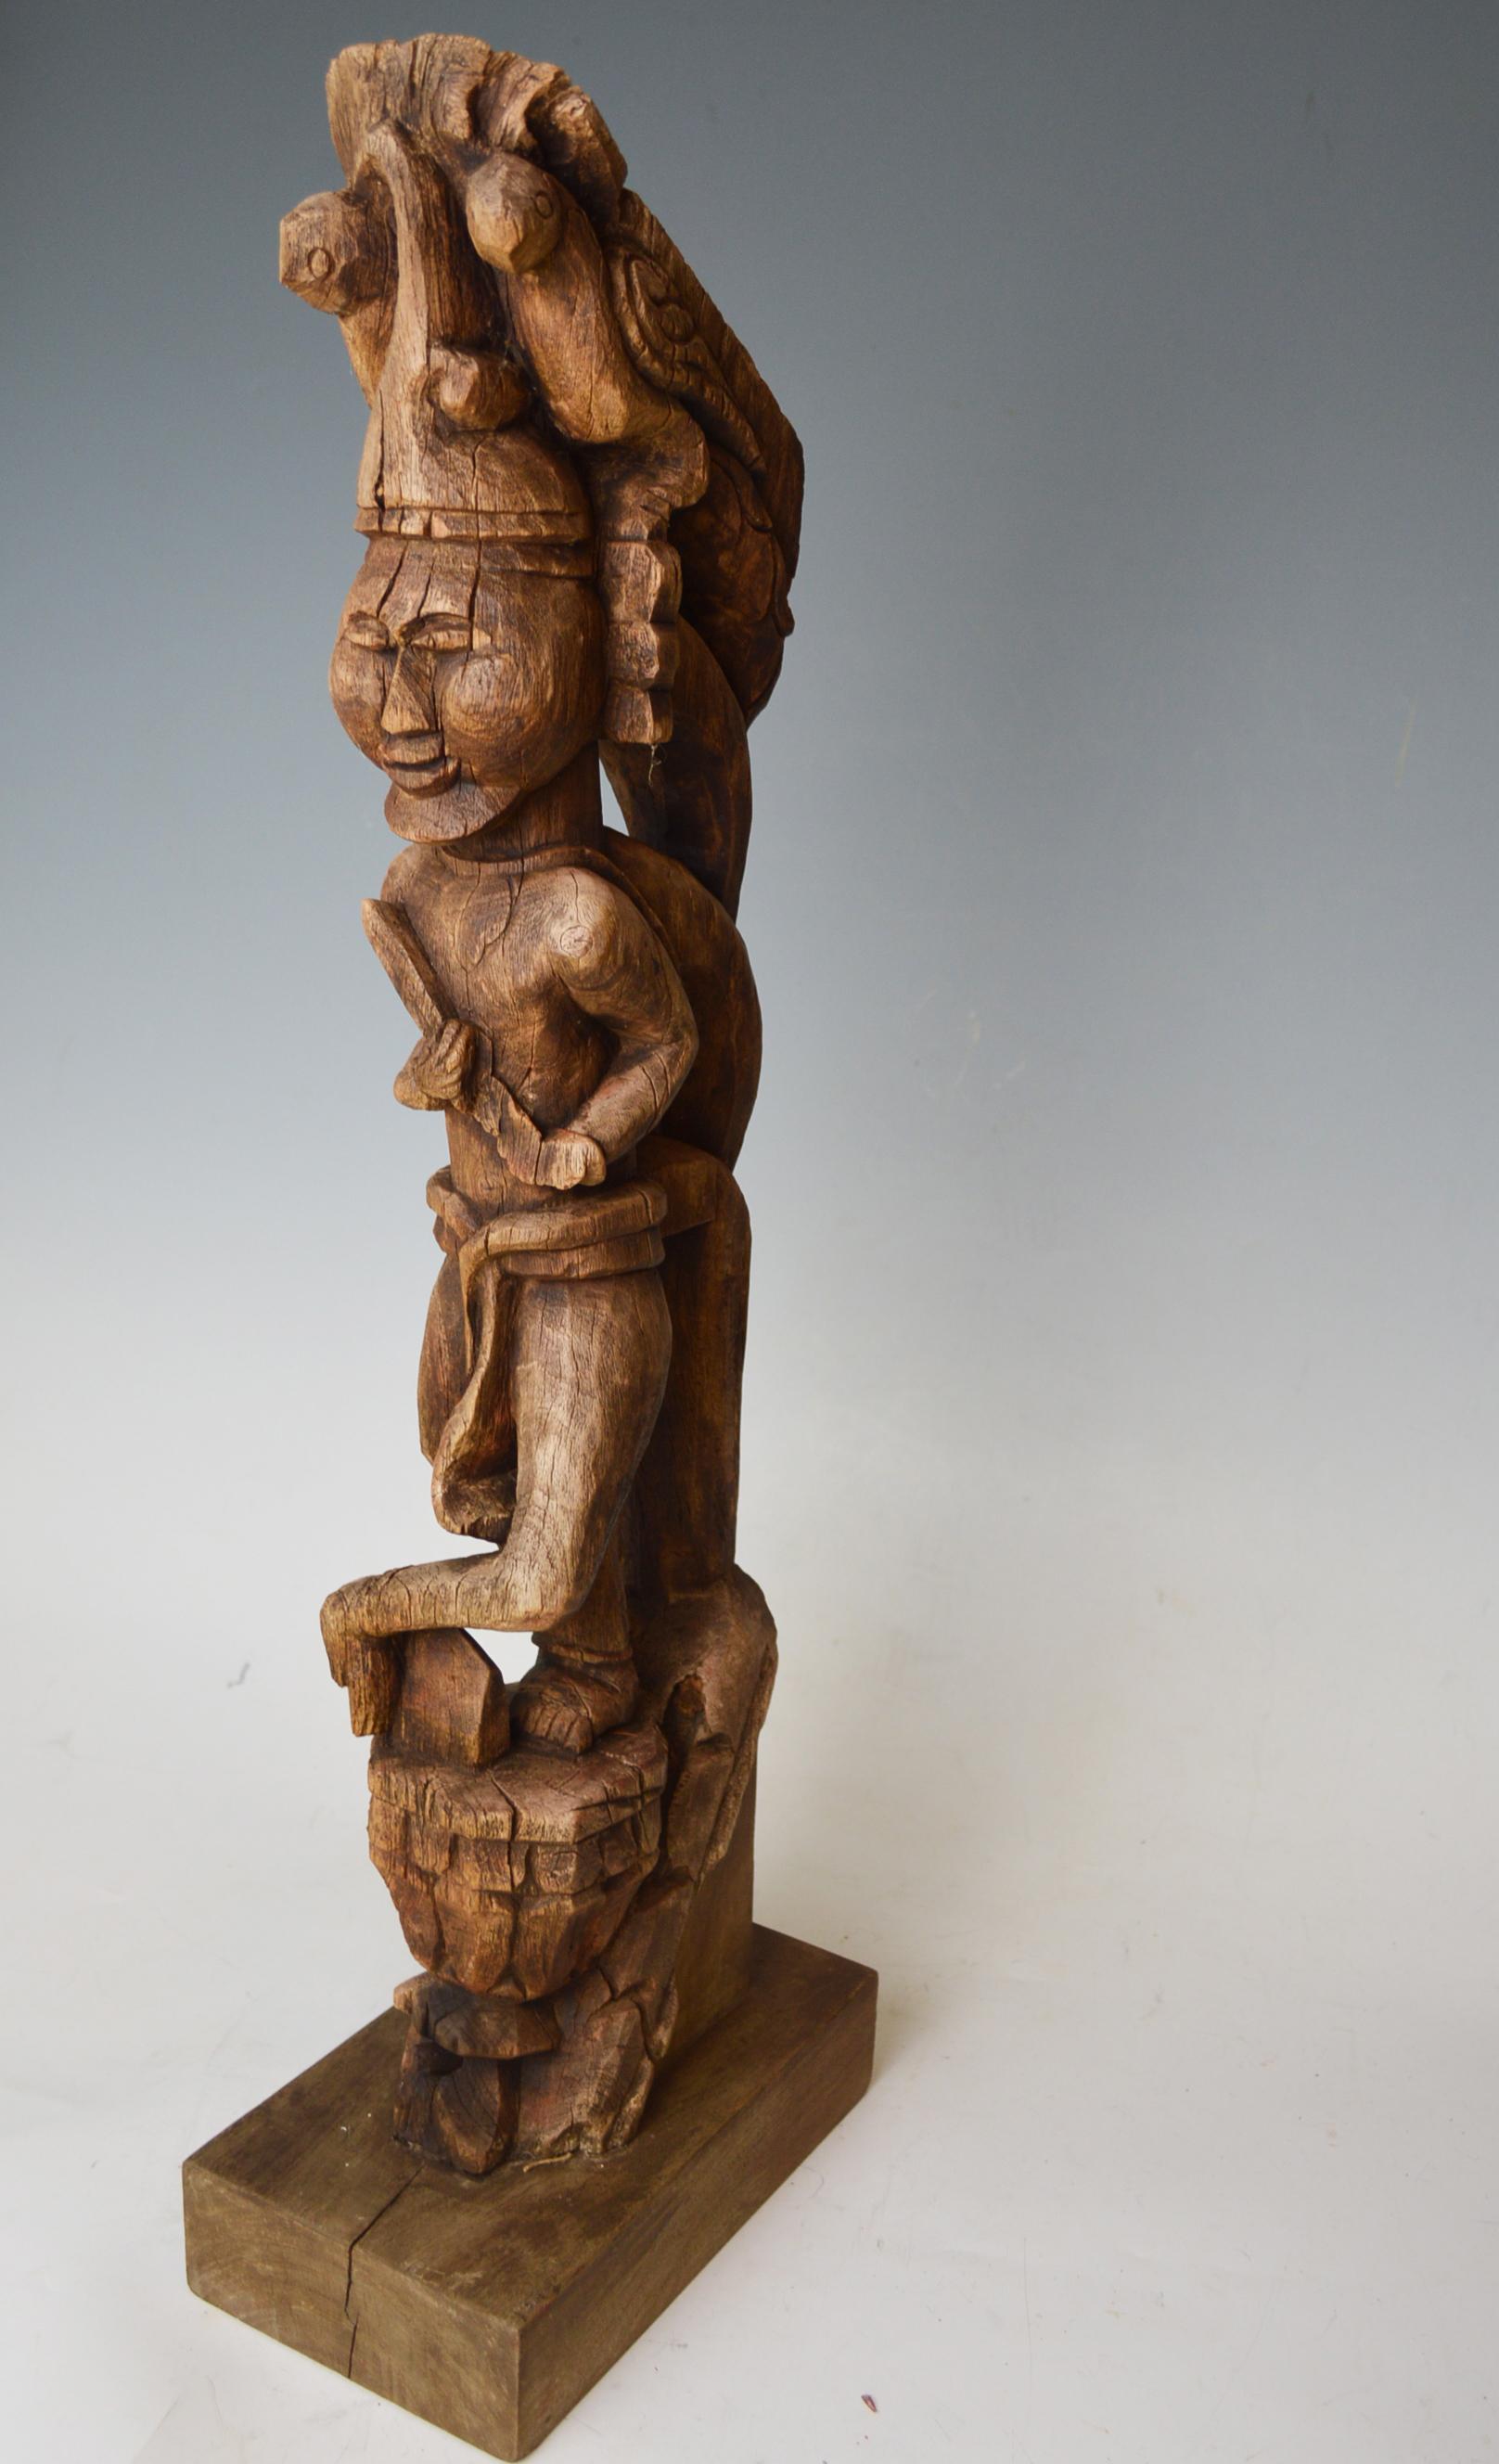 A fine antique indo Burmese bracket figure of standing figure in Longhi
on a traditional shaped pedestal surmounted by birds, probably from a palace
Measures: Height 65 cm, width 10 cm
Presented on a wood stand.
Period: 18th-early 19th century.